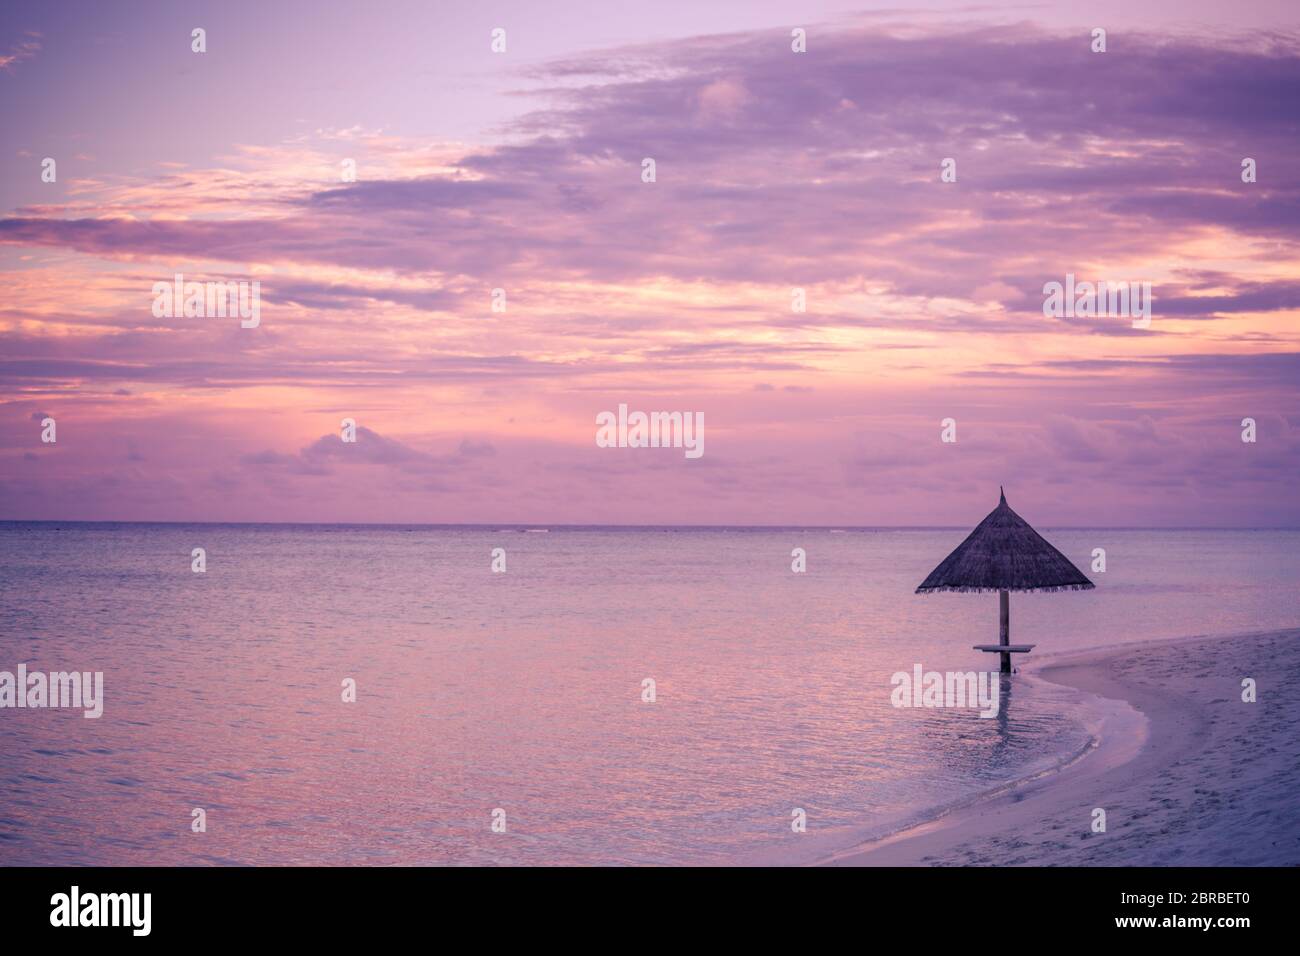 Sea sunset and wooden parasol on the beach, colorful sky and seascape Stock Photo